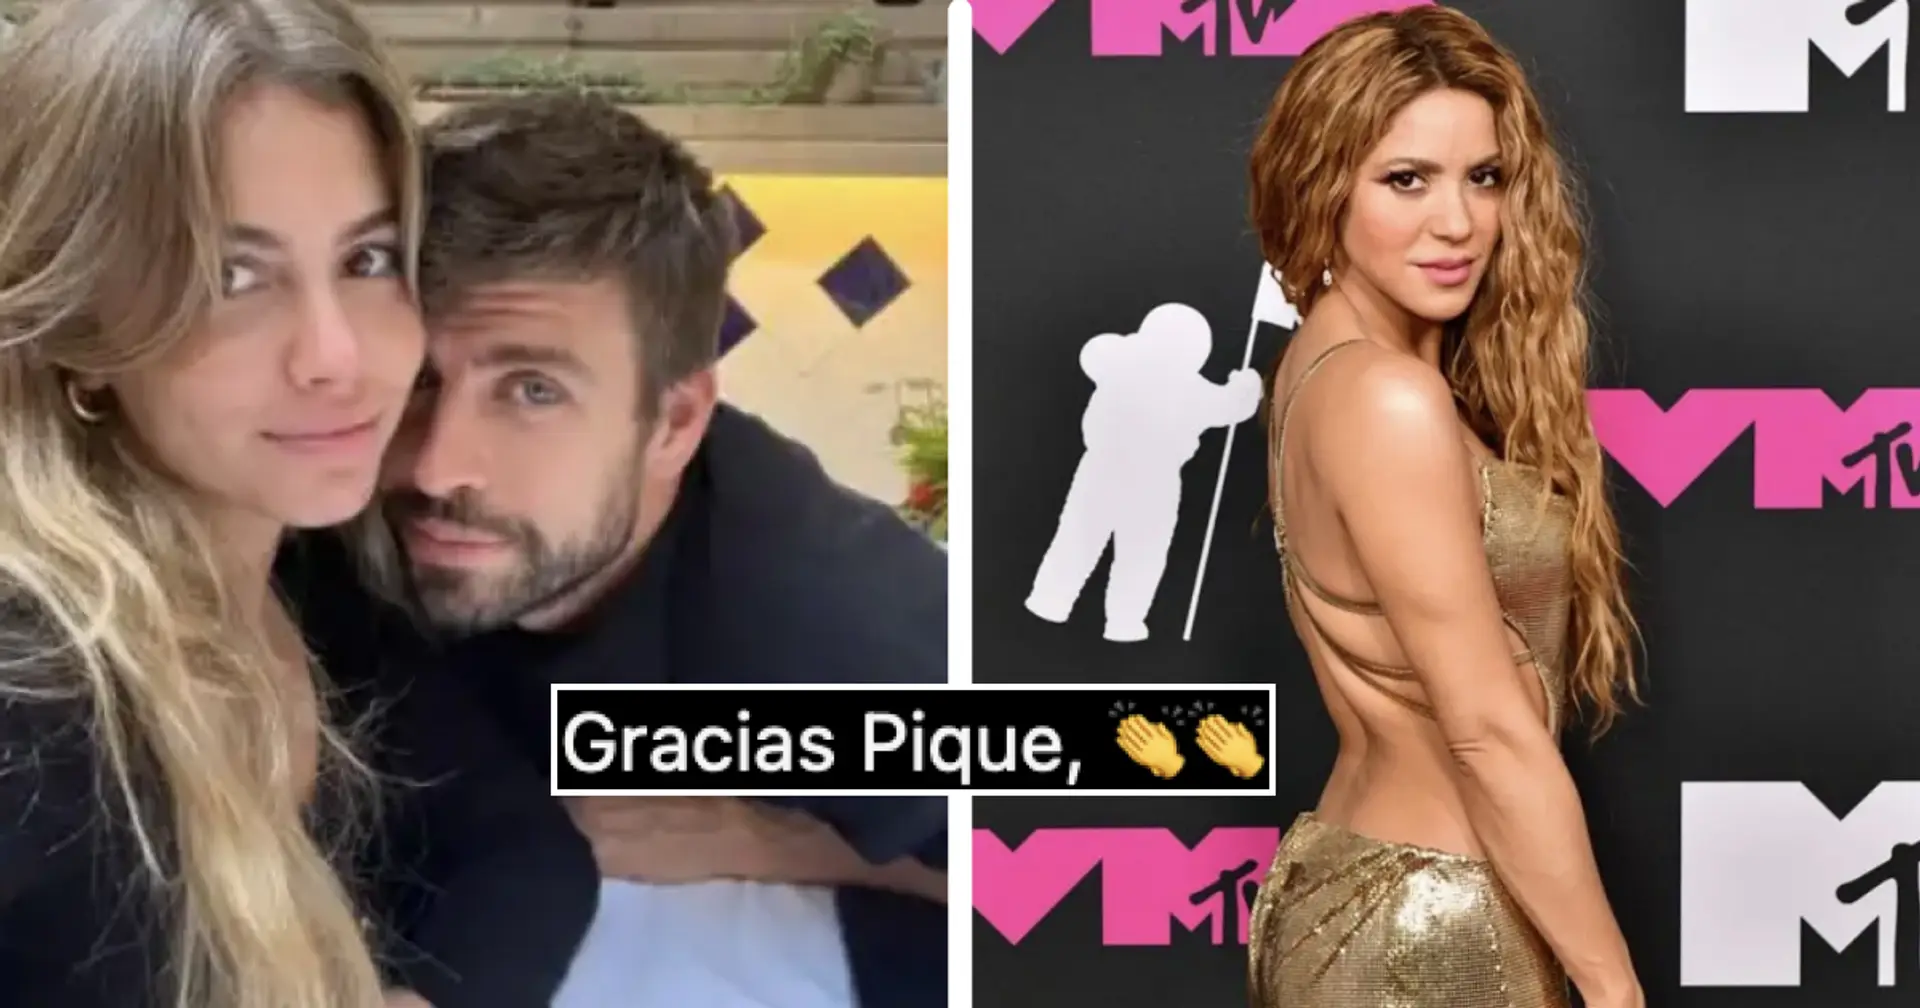 Pique and his new girlfriend praised for return of 'best singer in history': explained